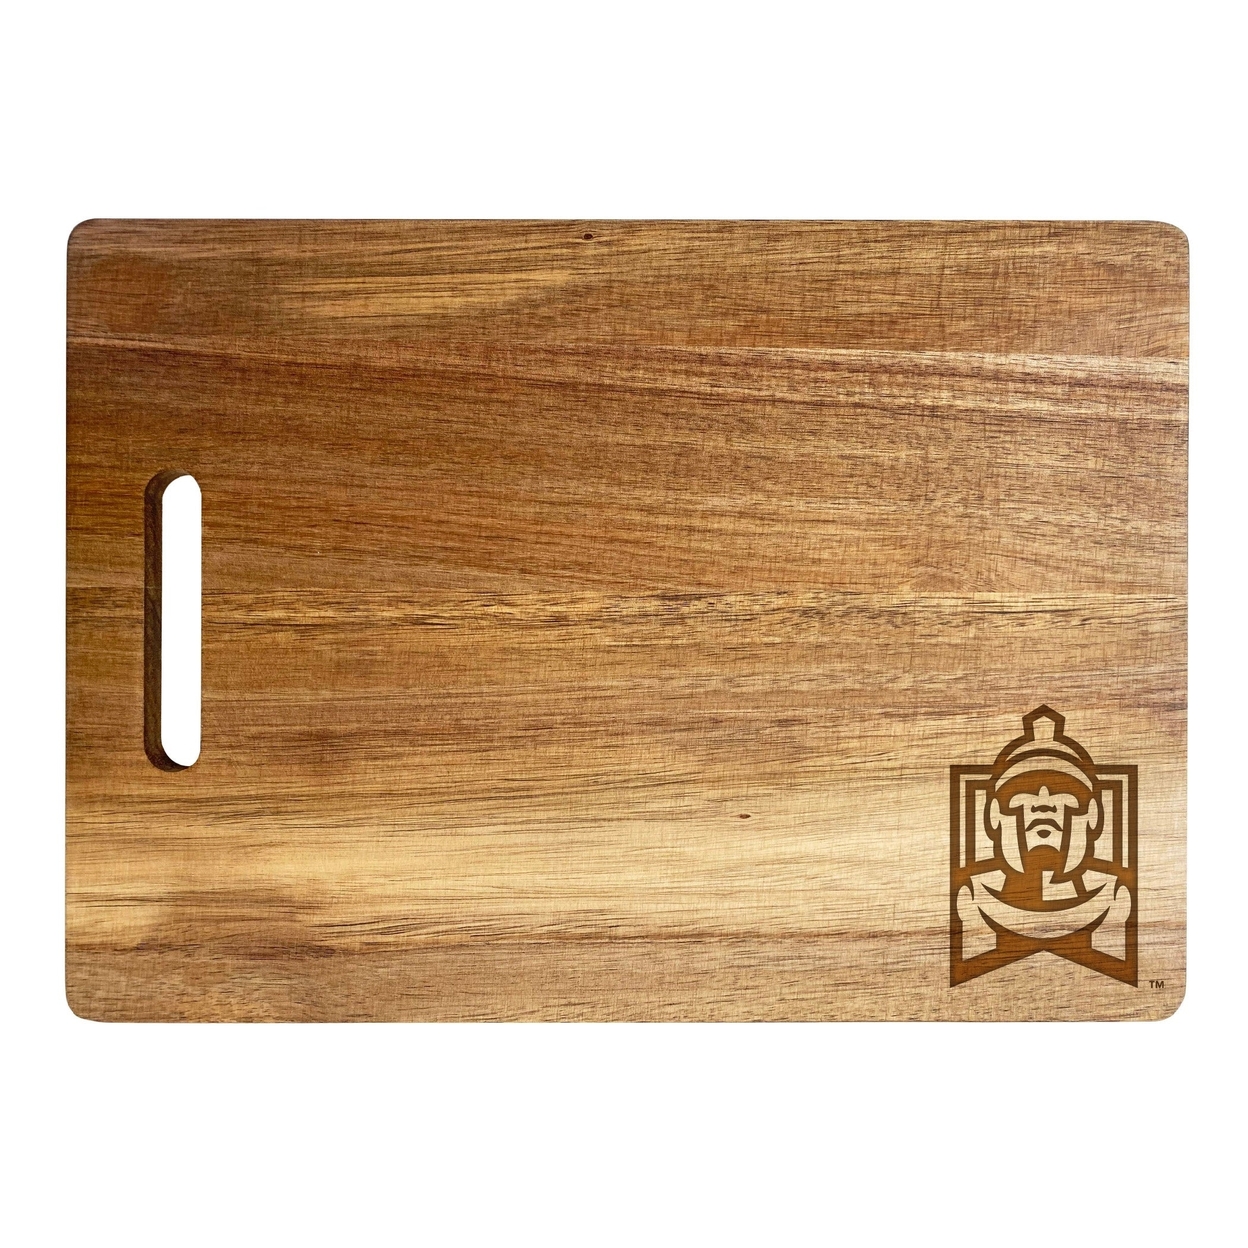 East Stroudsburg University Engraved Wooden Cutting Board 10 X 14 Acacia Wood - Small Engraving